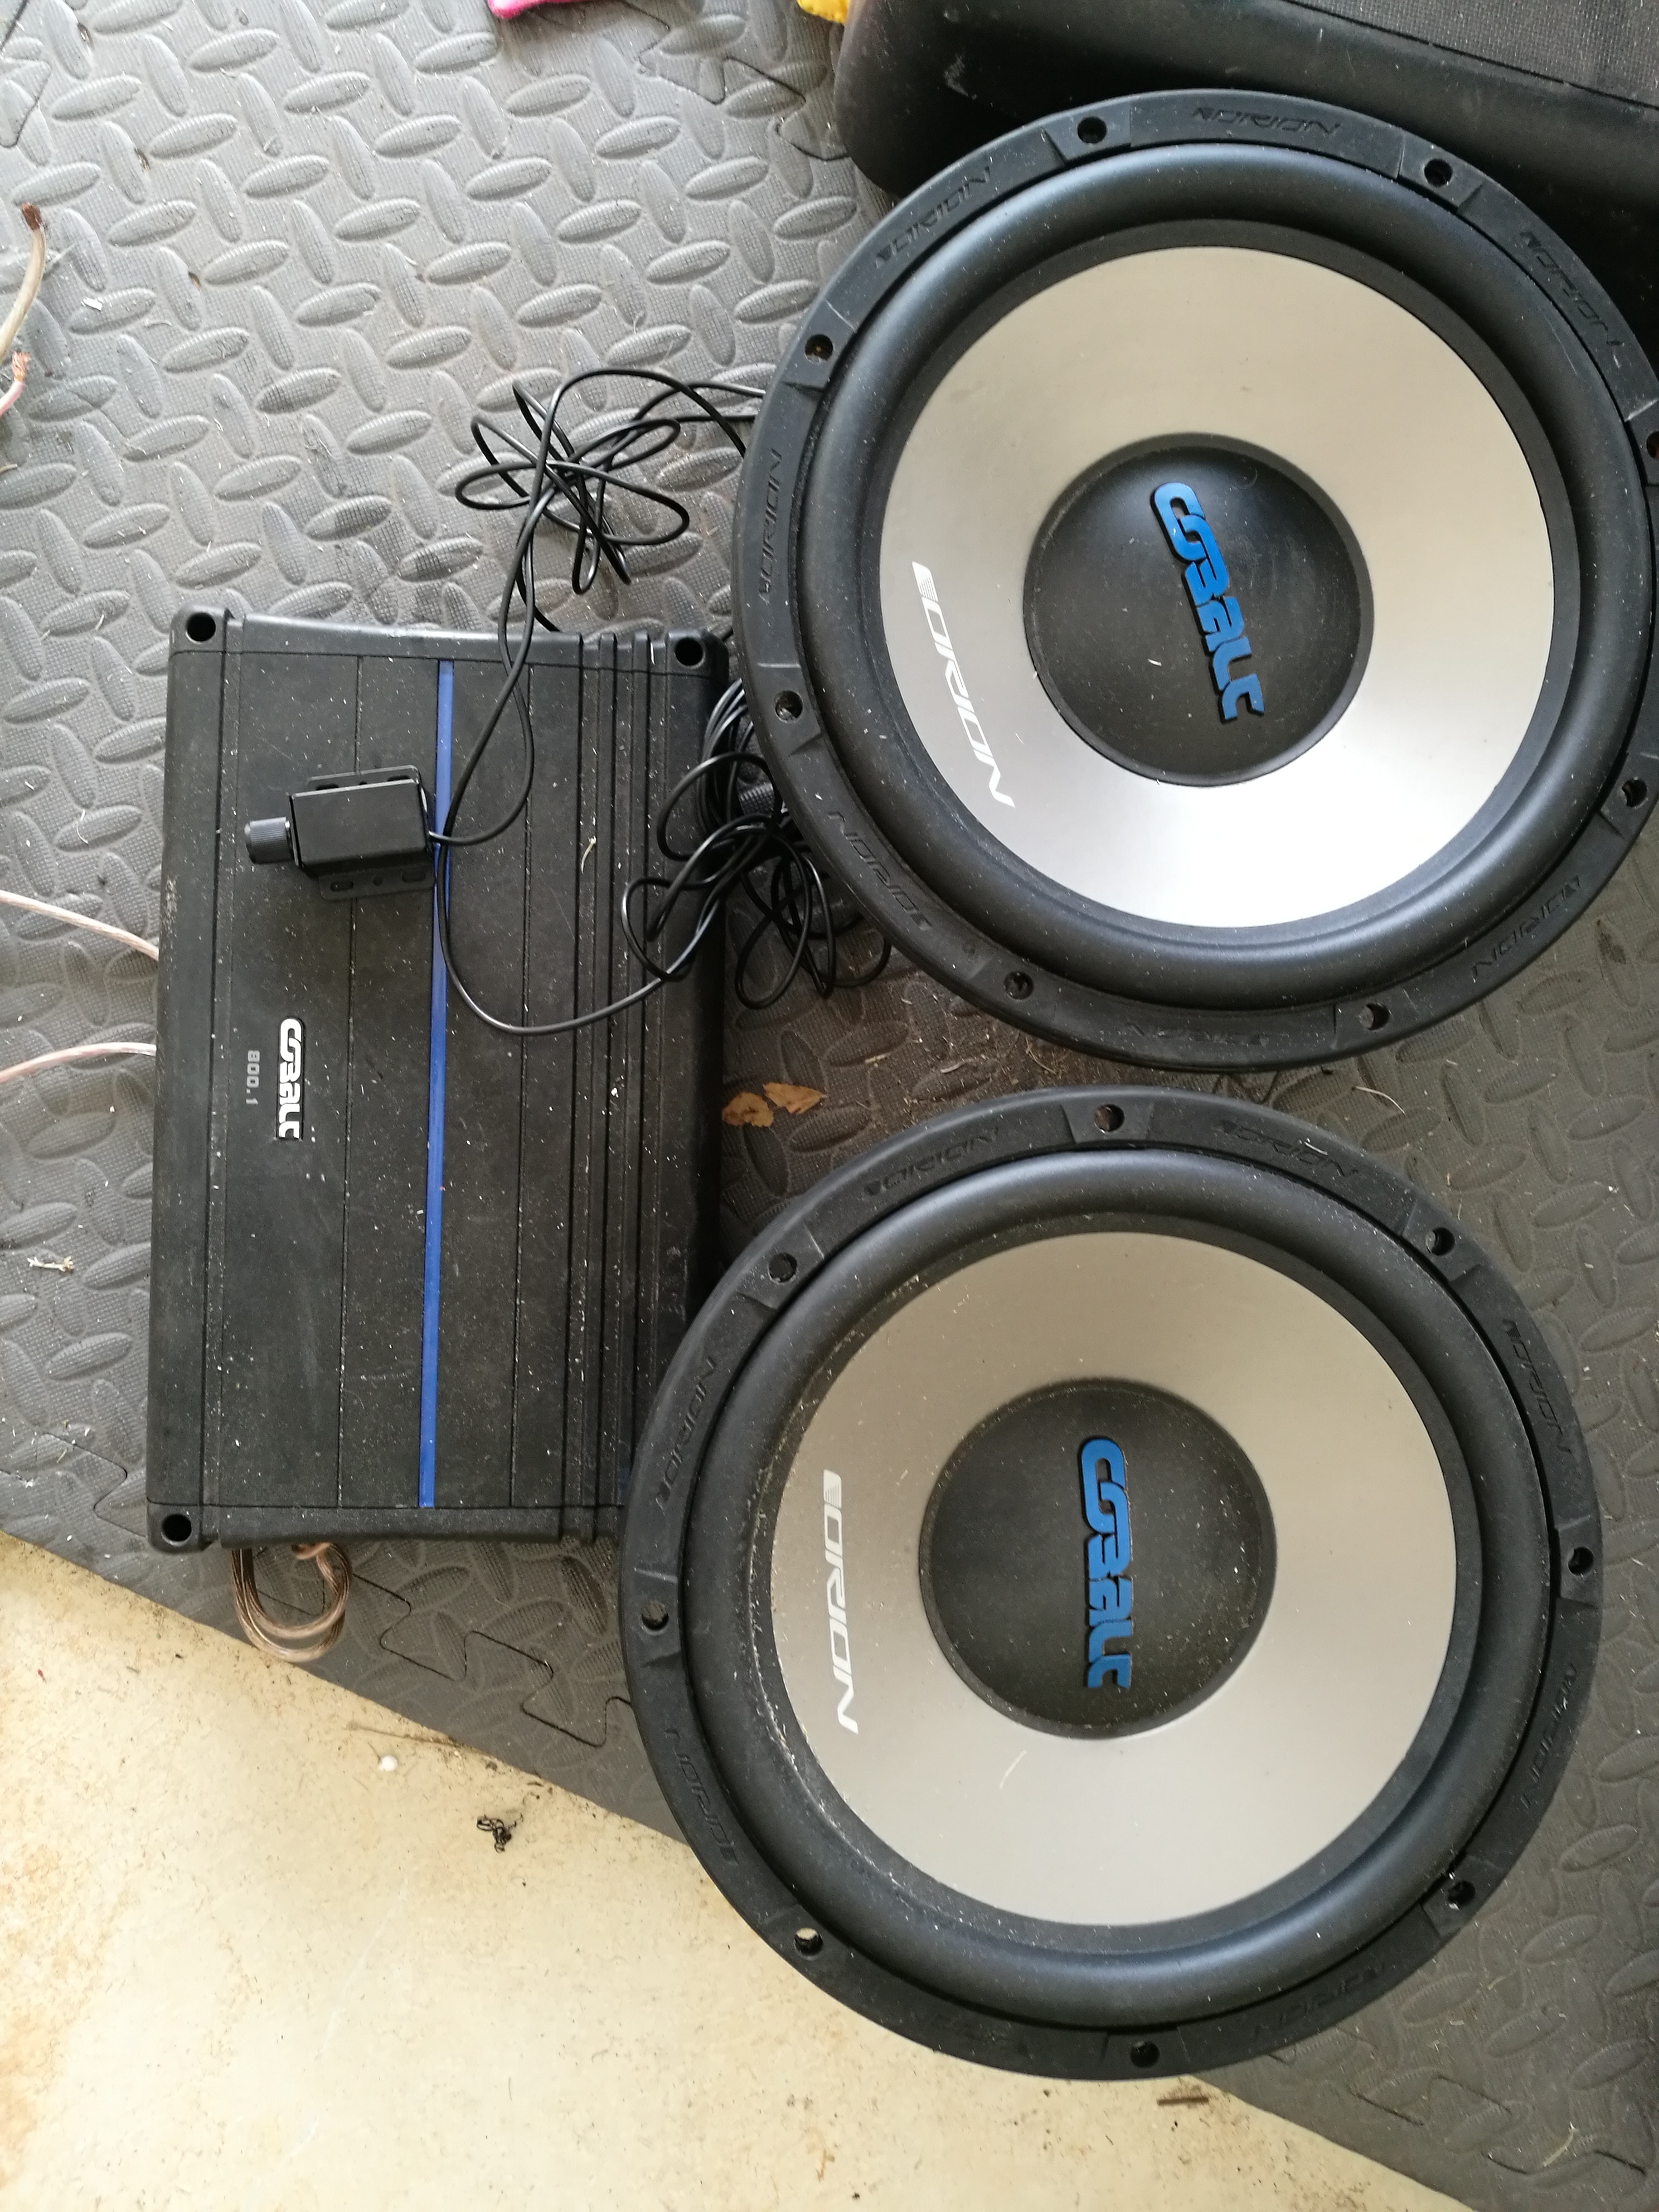 2 Orion Cobalt Subwoofers, Amplifier and Remote GAIN